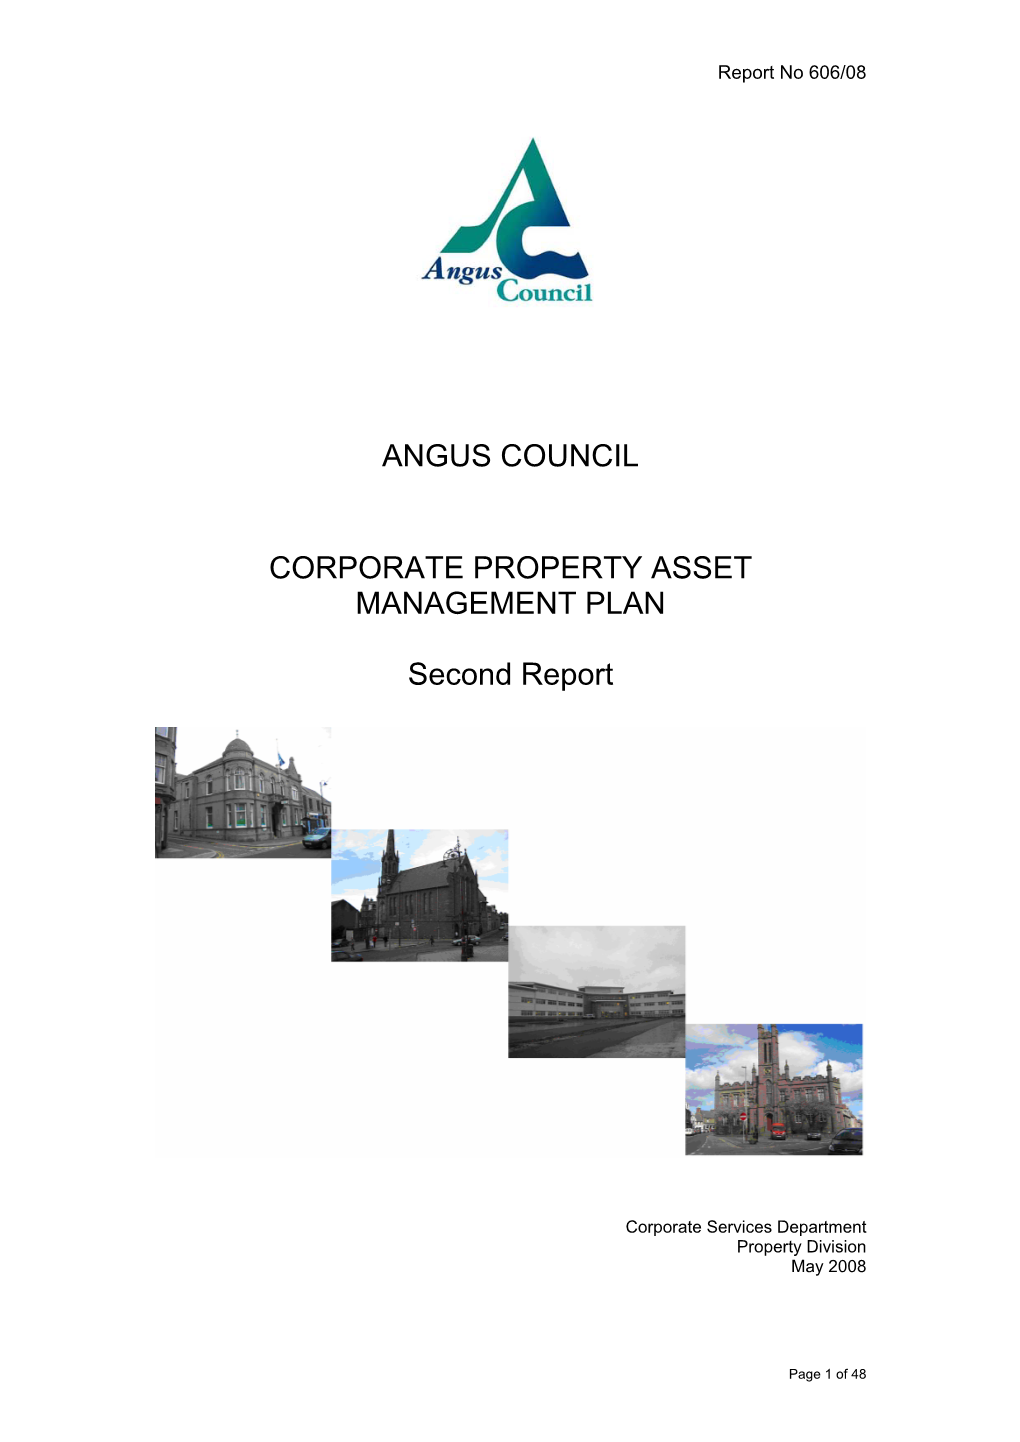 Angus Council Corporate Property Asset